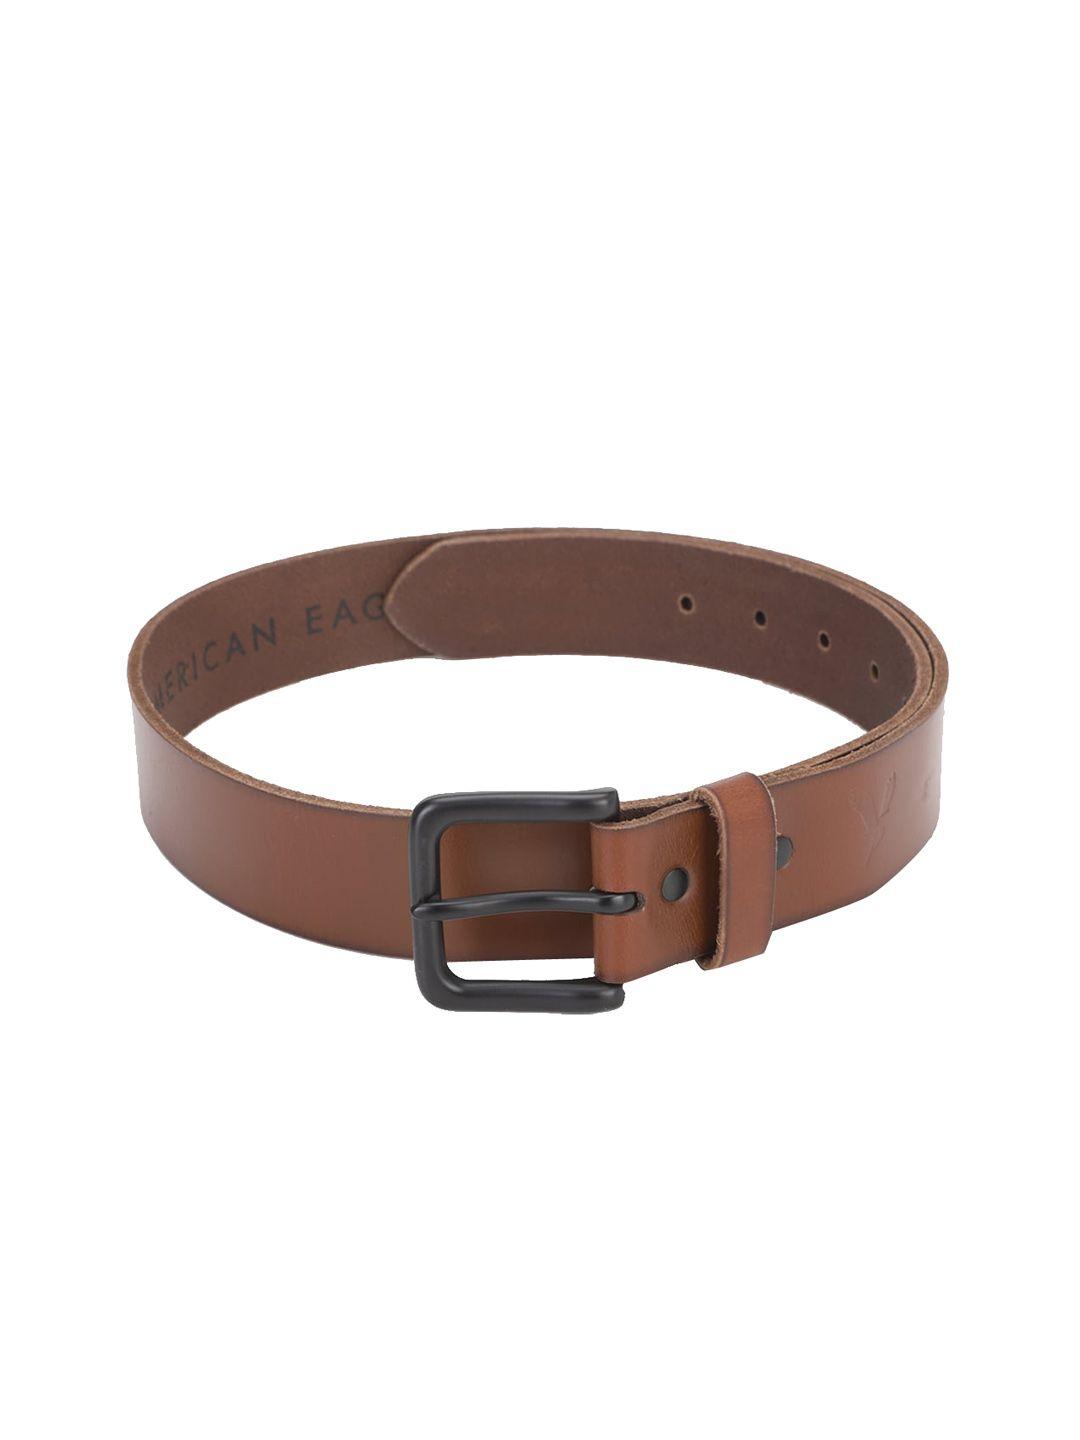 american eagle outfitters men brown leather belts